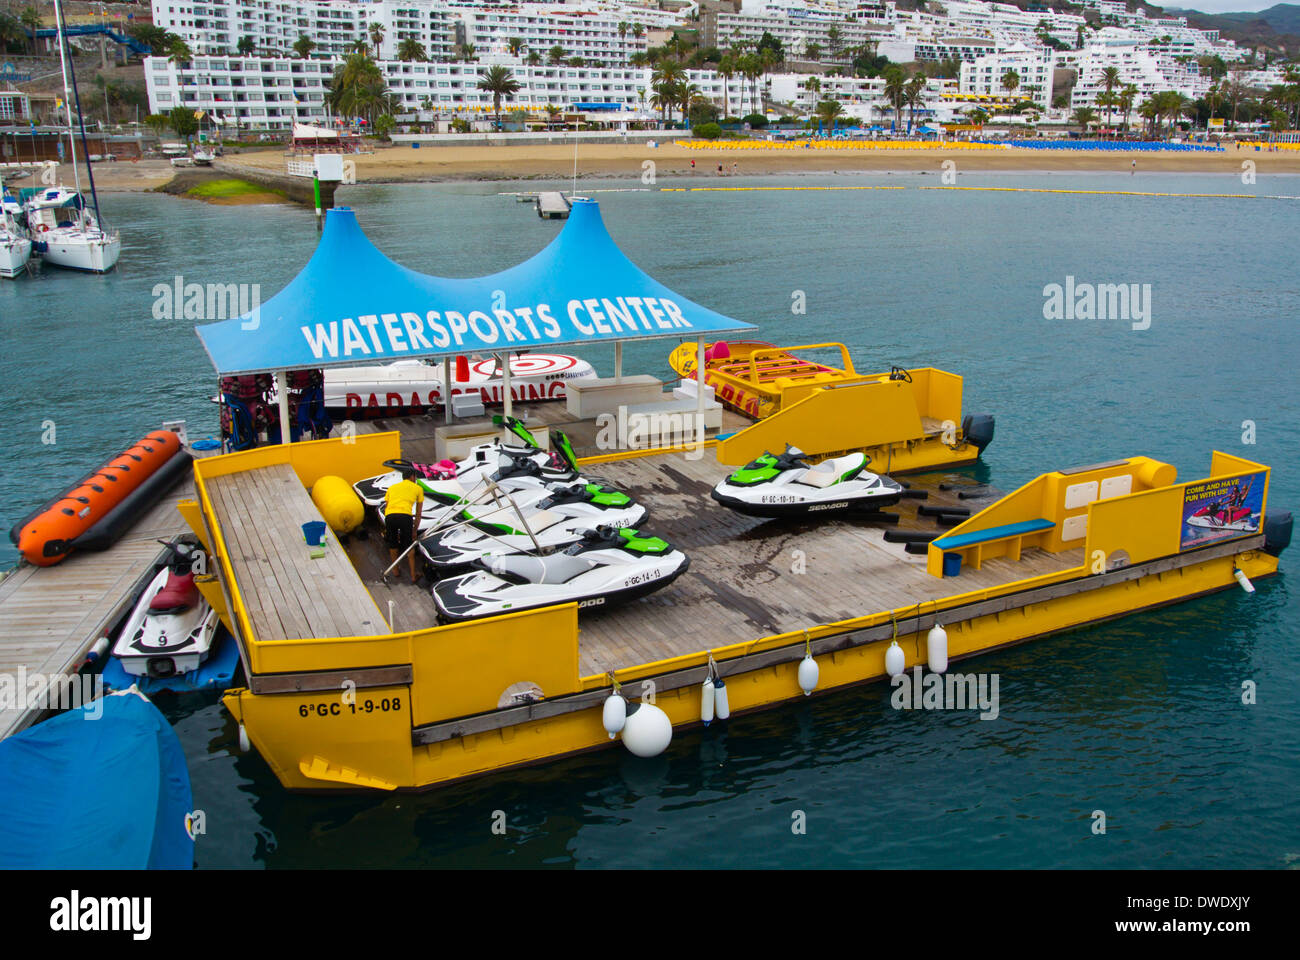 Watersports center, Puerto the port, Puerto Rico, Gran Canaria island, the Canary Islands, Spain, Europe Stock Photo